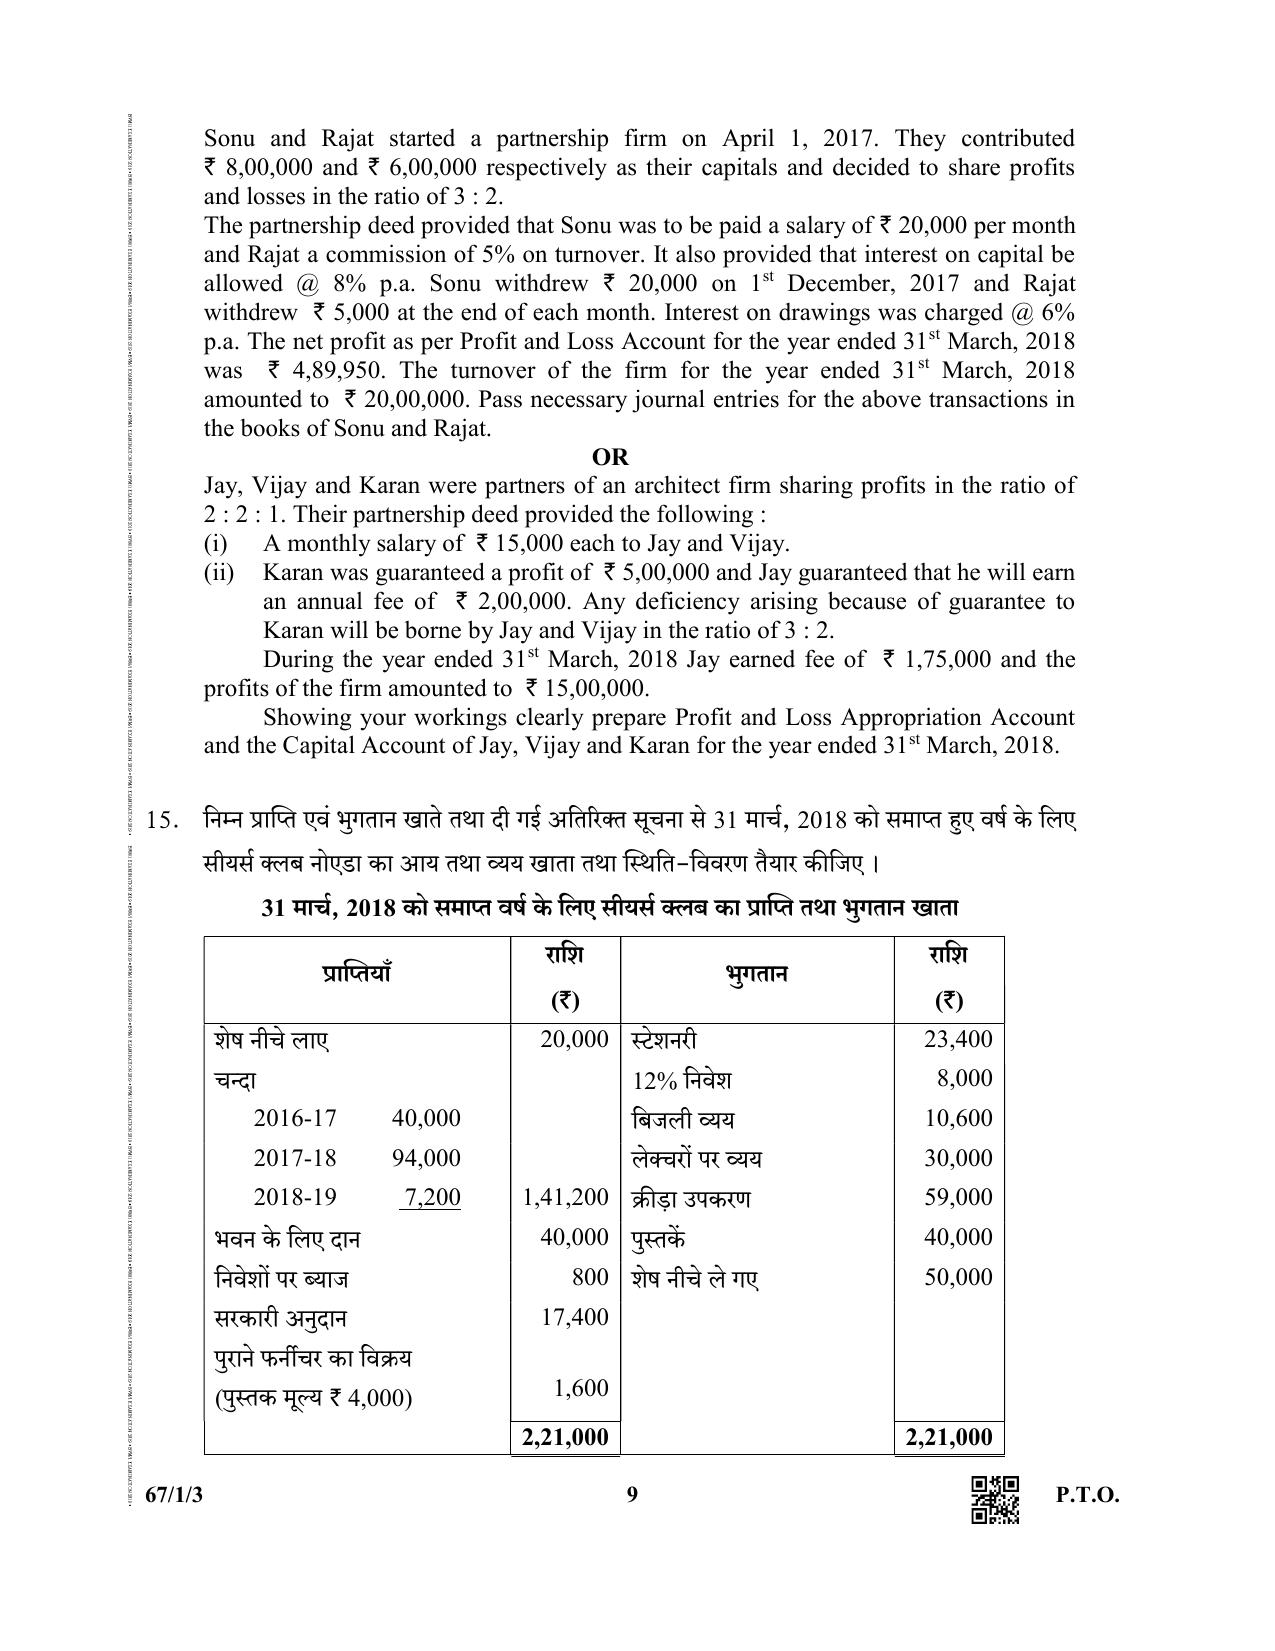 CBSE Class 12 67-1-3  (Accountancy) 2019 Question Paper - Page 9